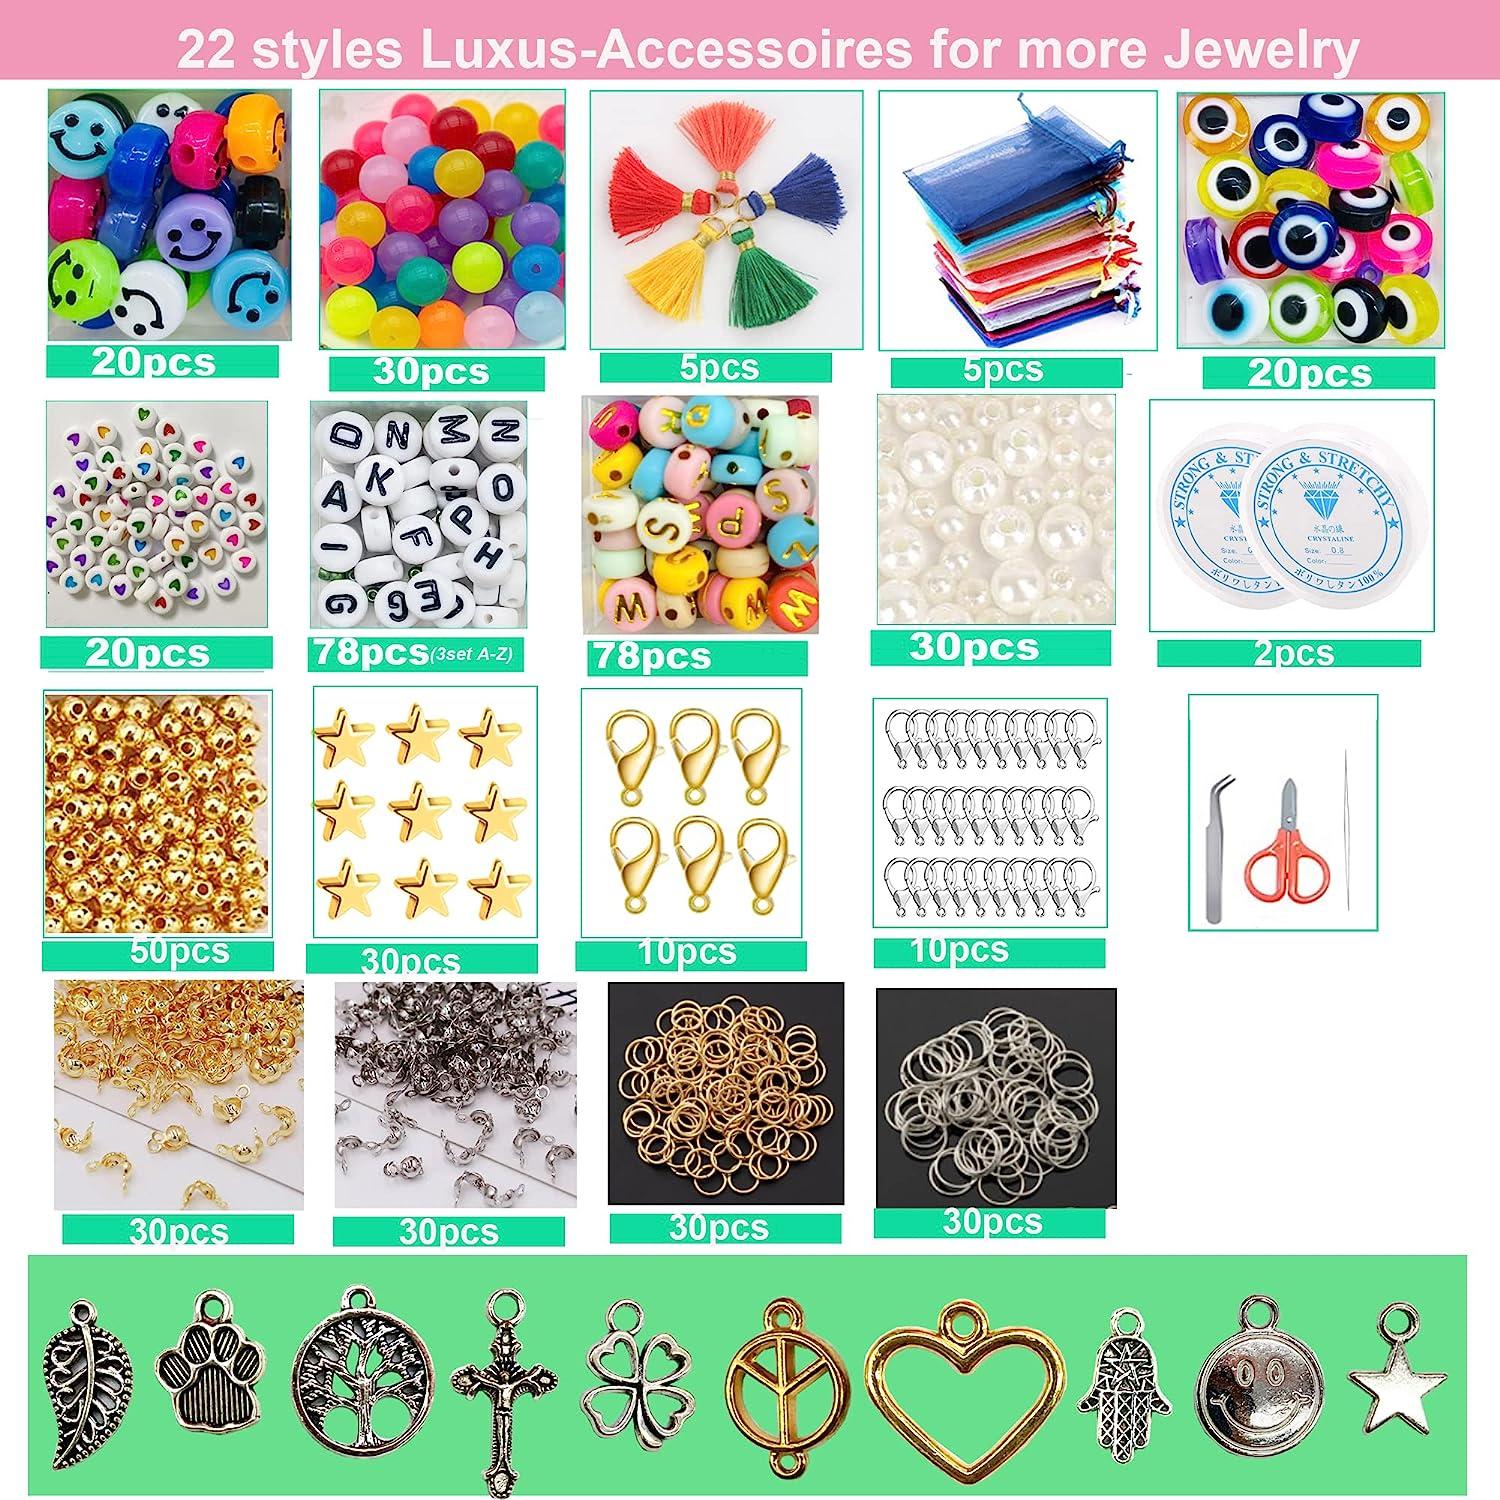 Seed Beads 16000pcs 3mm 36 Color Glass Beads for Bracelet Making Kit  Aesthetic Glass Seed Beads with 22 Different Beads Charms Kit for DIY Bracelet  Necklace Ring Making (3mm)